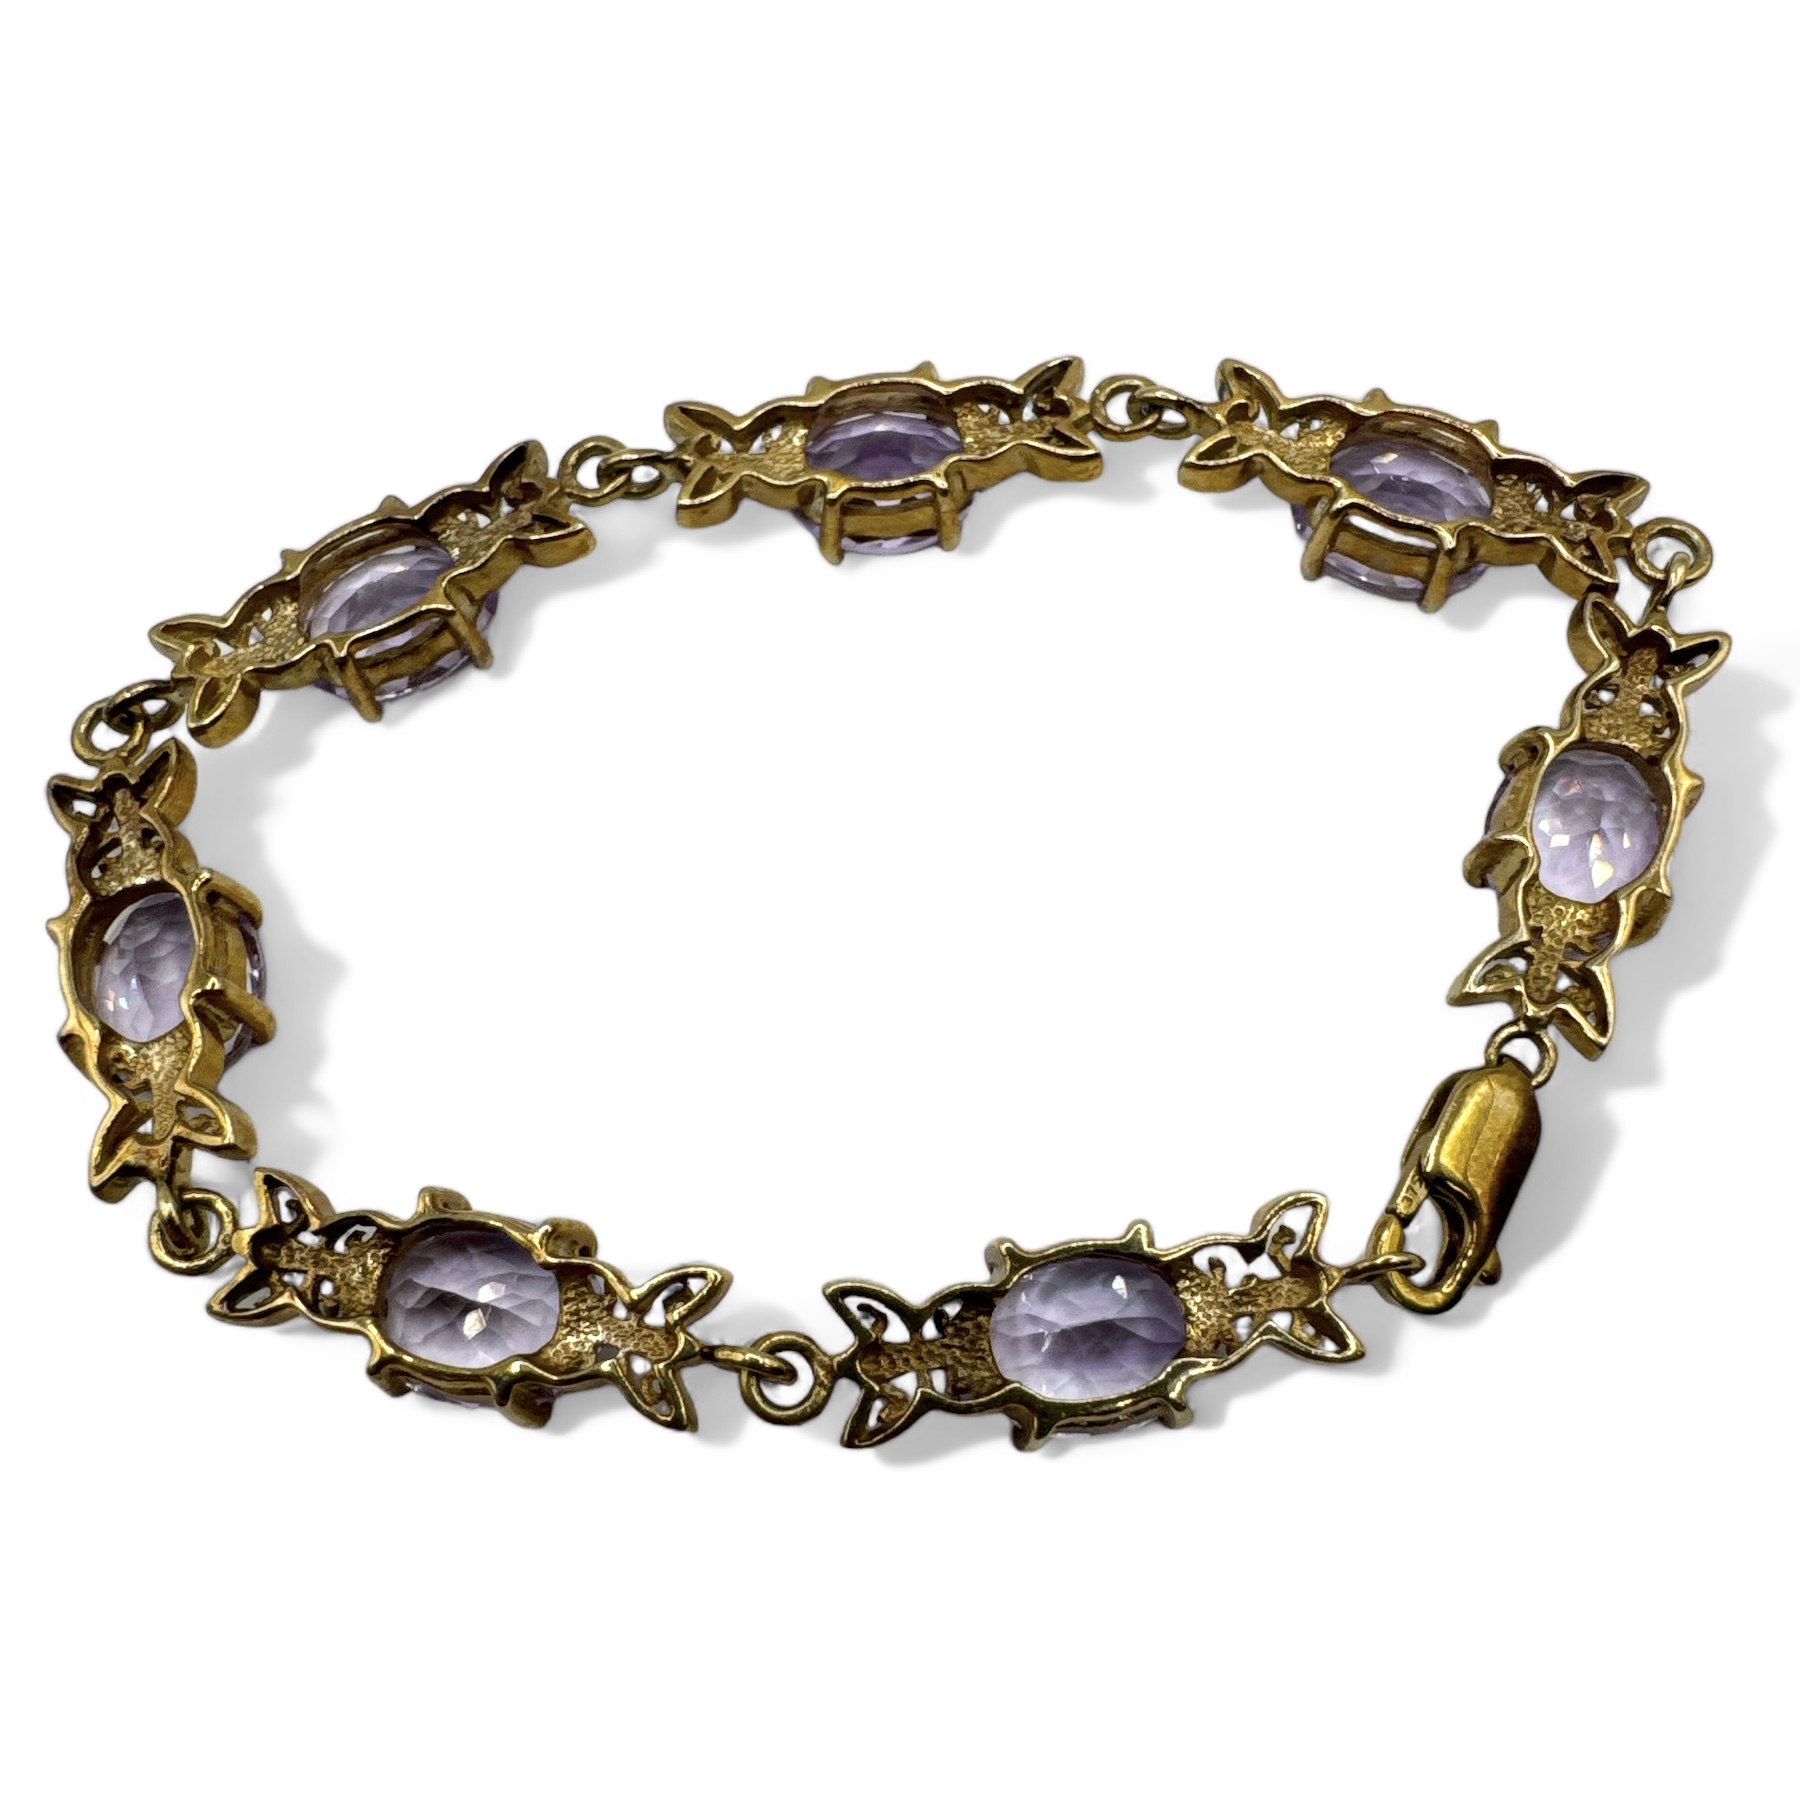 A 9ct Rose de France amethyst set gold bracelet, with foliate scroll work. With lobster clasp. - Image 2 of 3